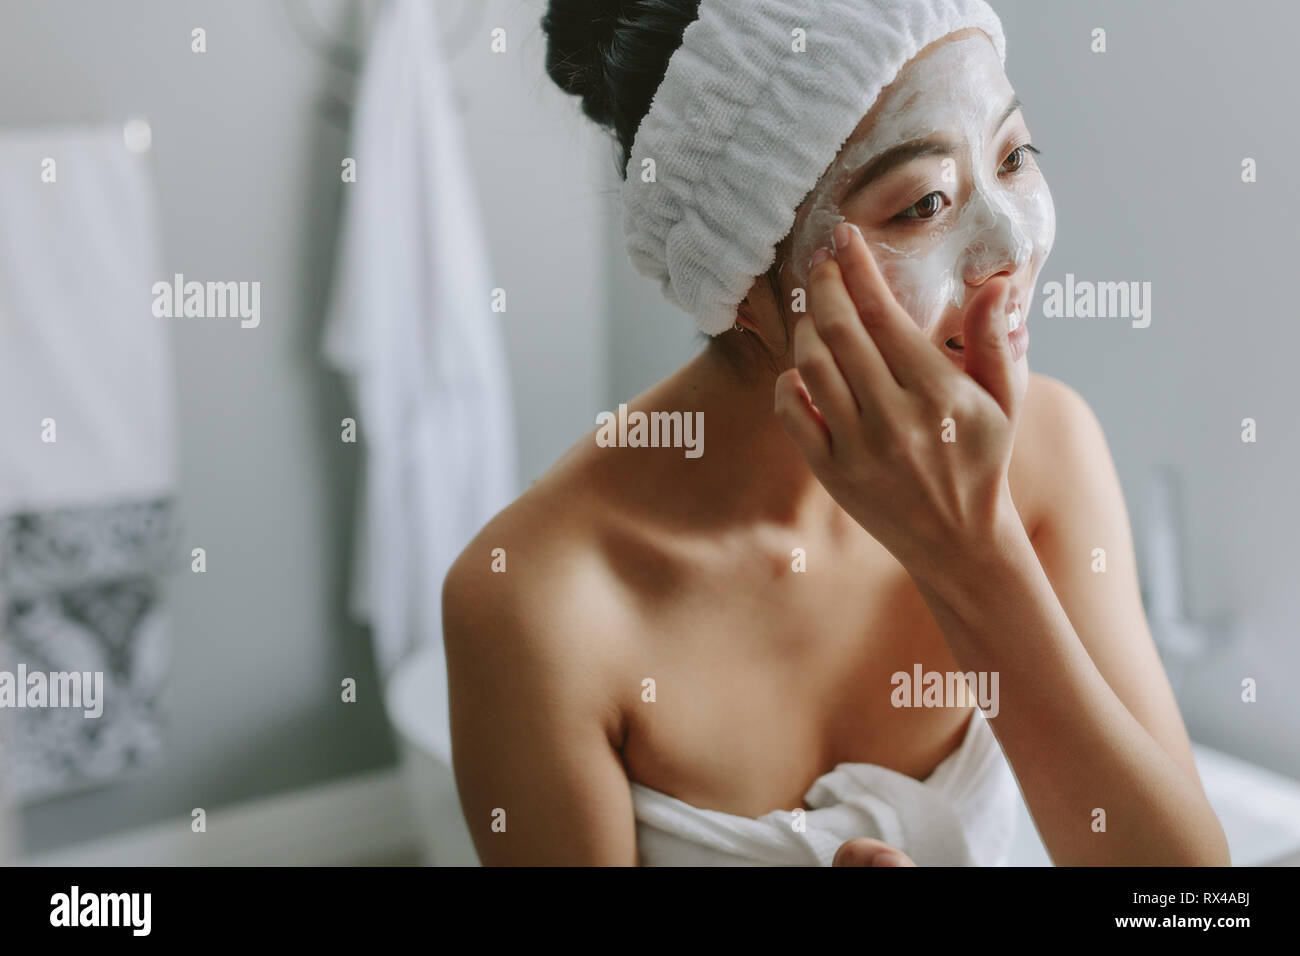 Young asian woman in bathroom applying facial mask on her face. Female in putting face pack onto her face. Stock Photo